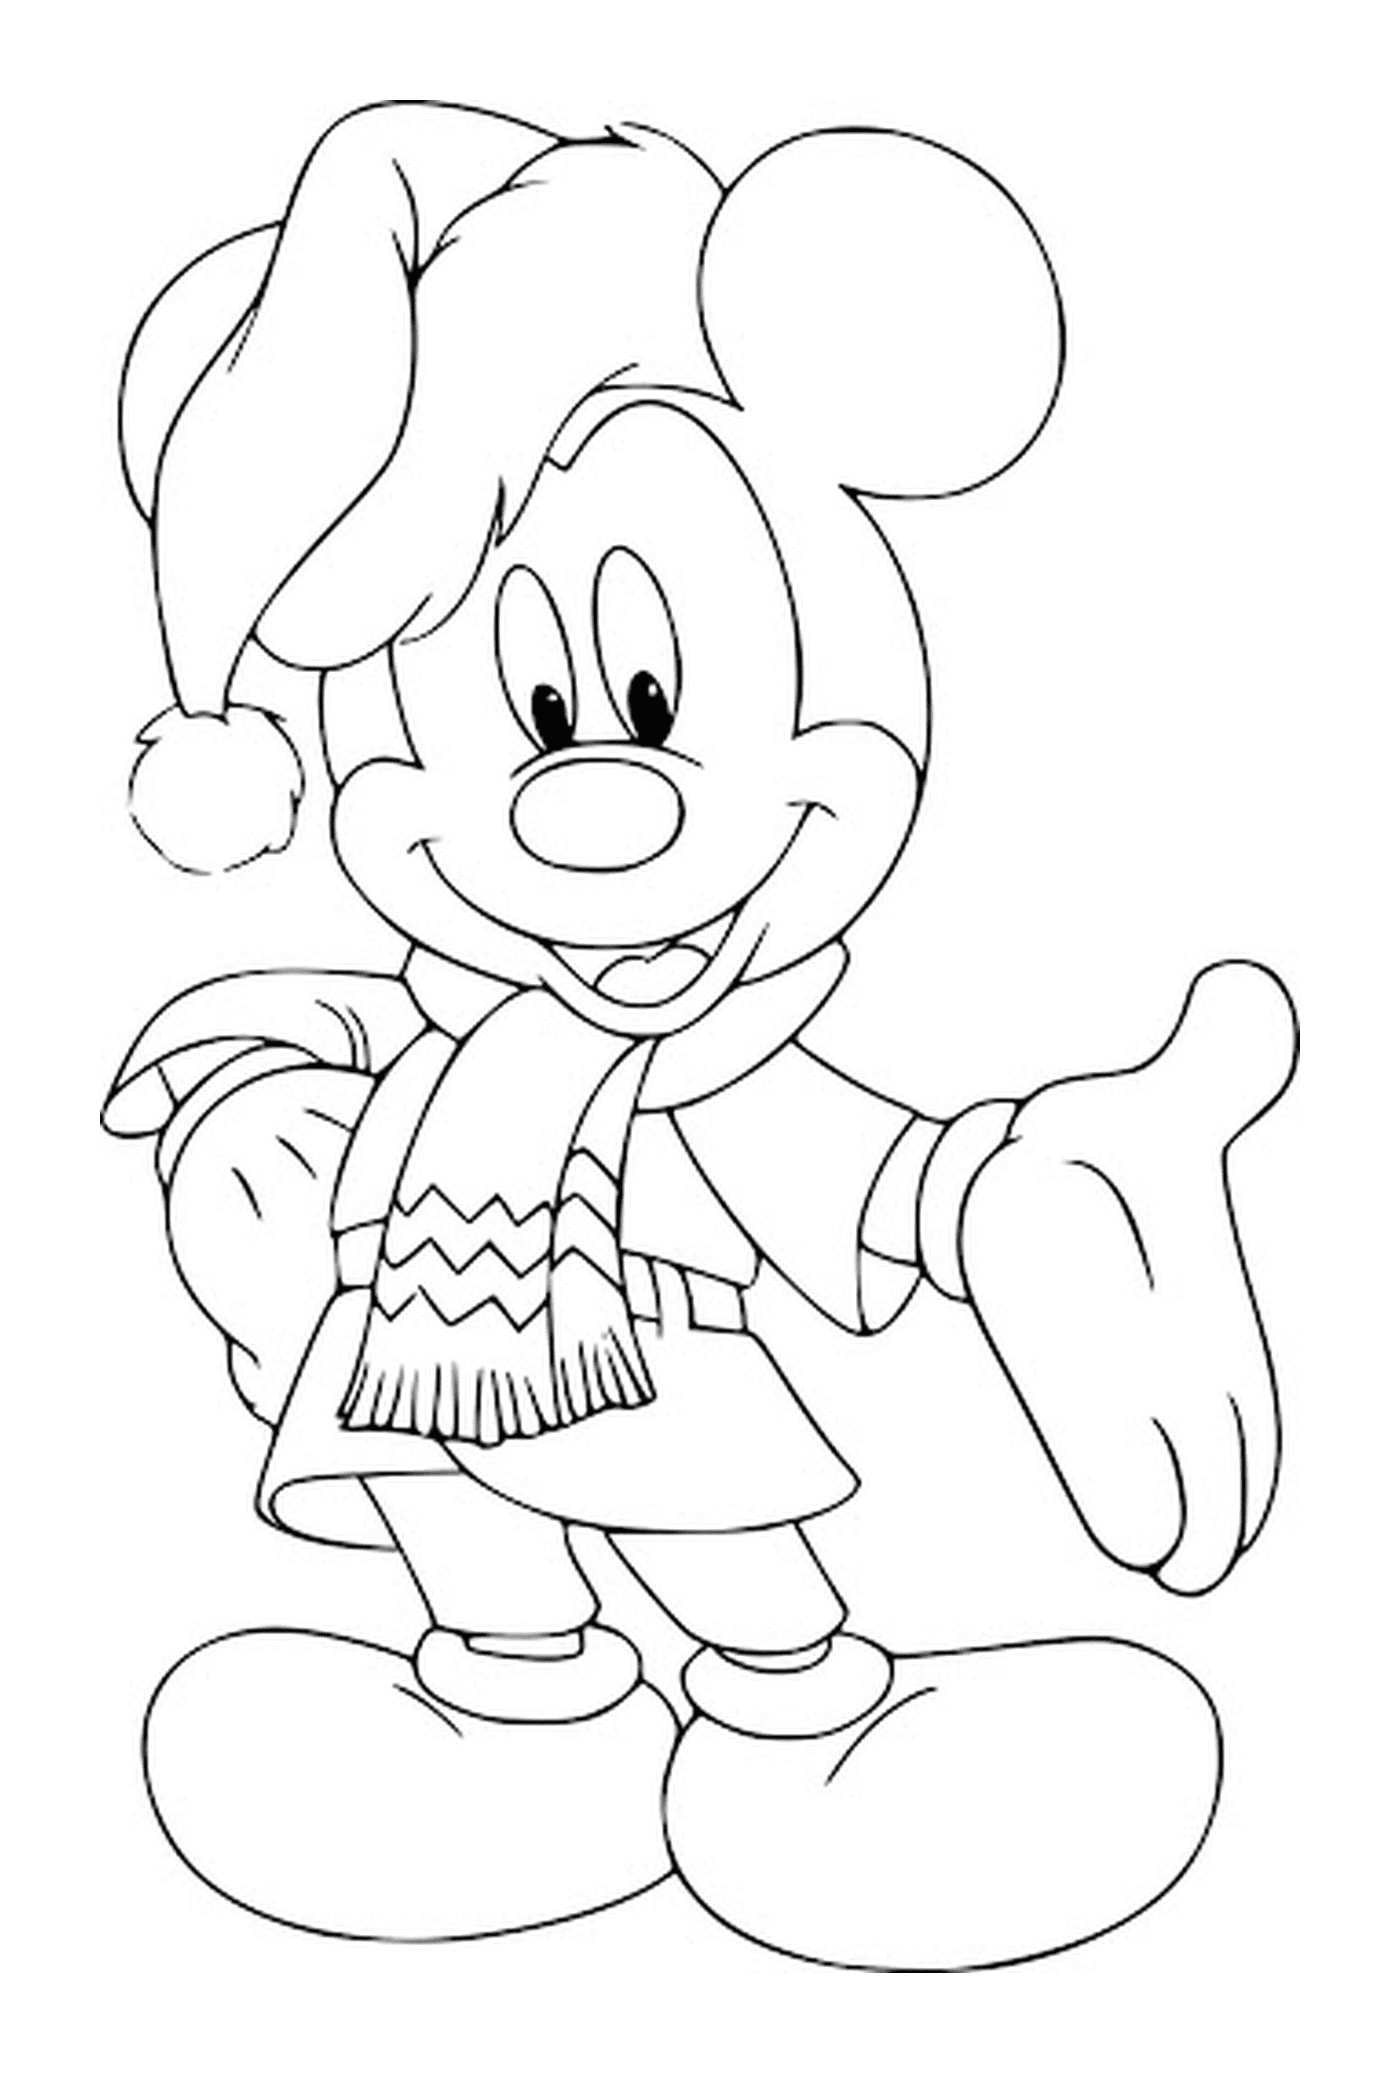  Mickey in winter outfit 